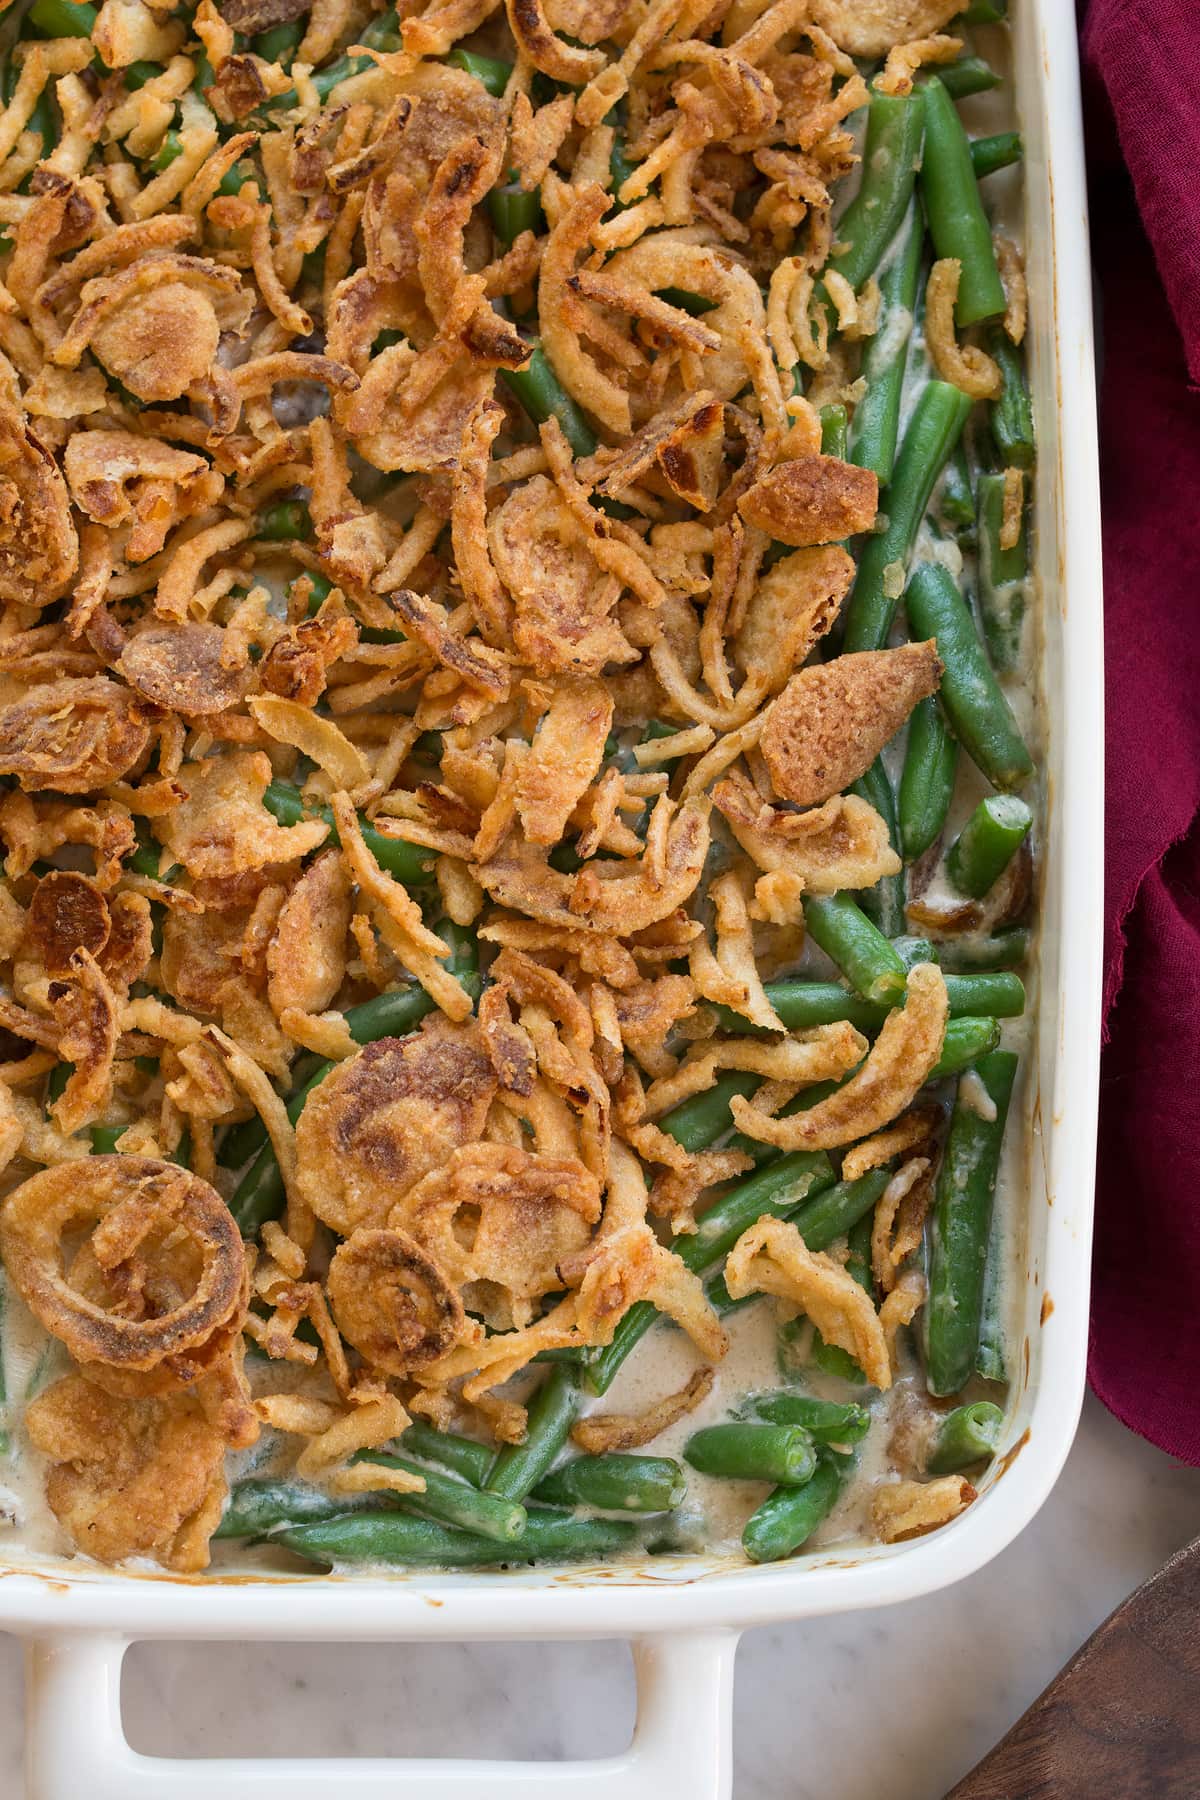 Close up overhead image of green bean casserole showing texture of topping and filling.